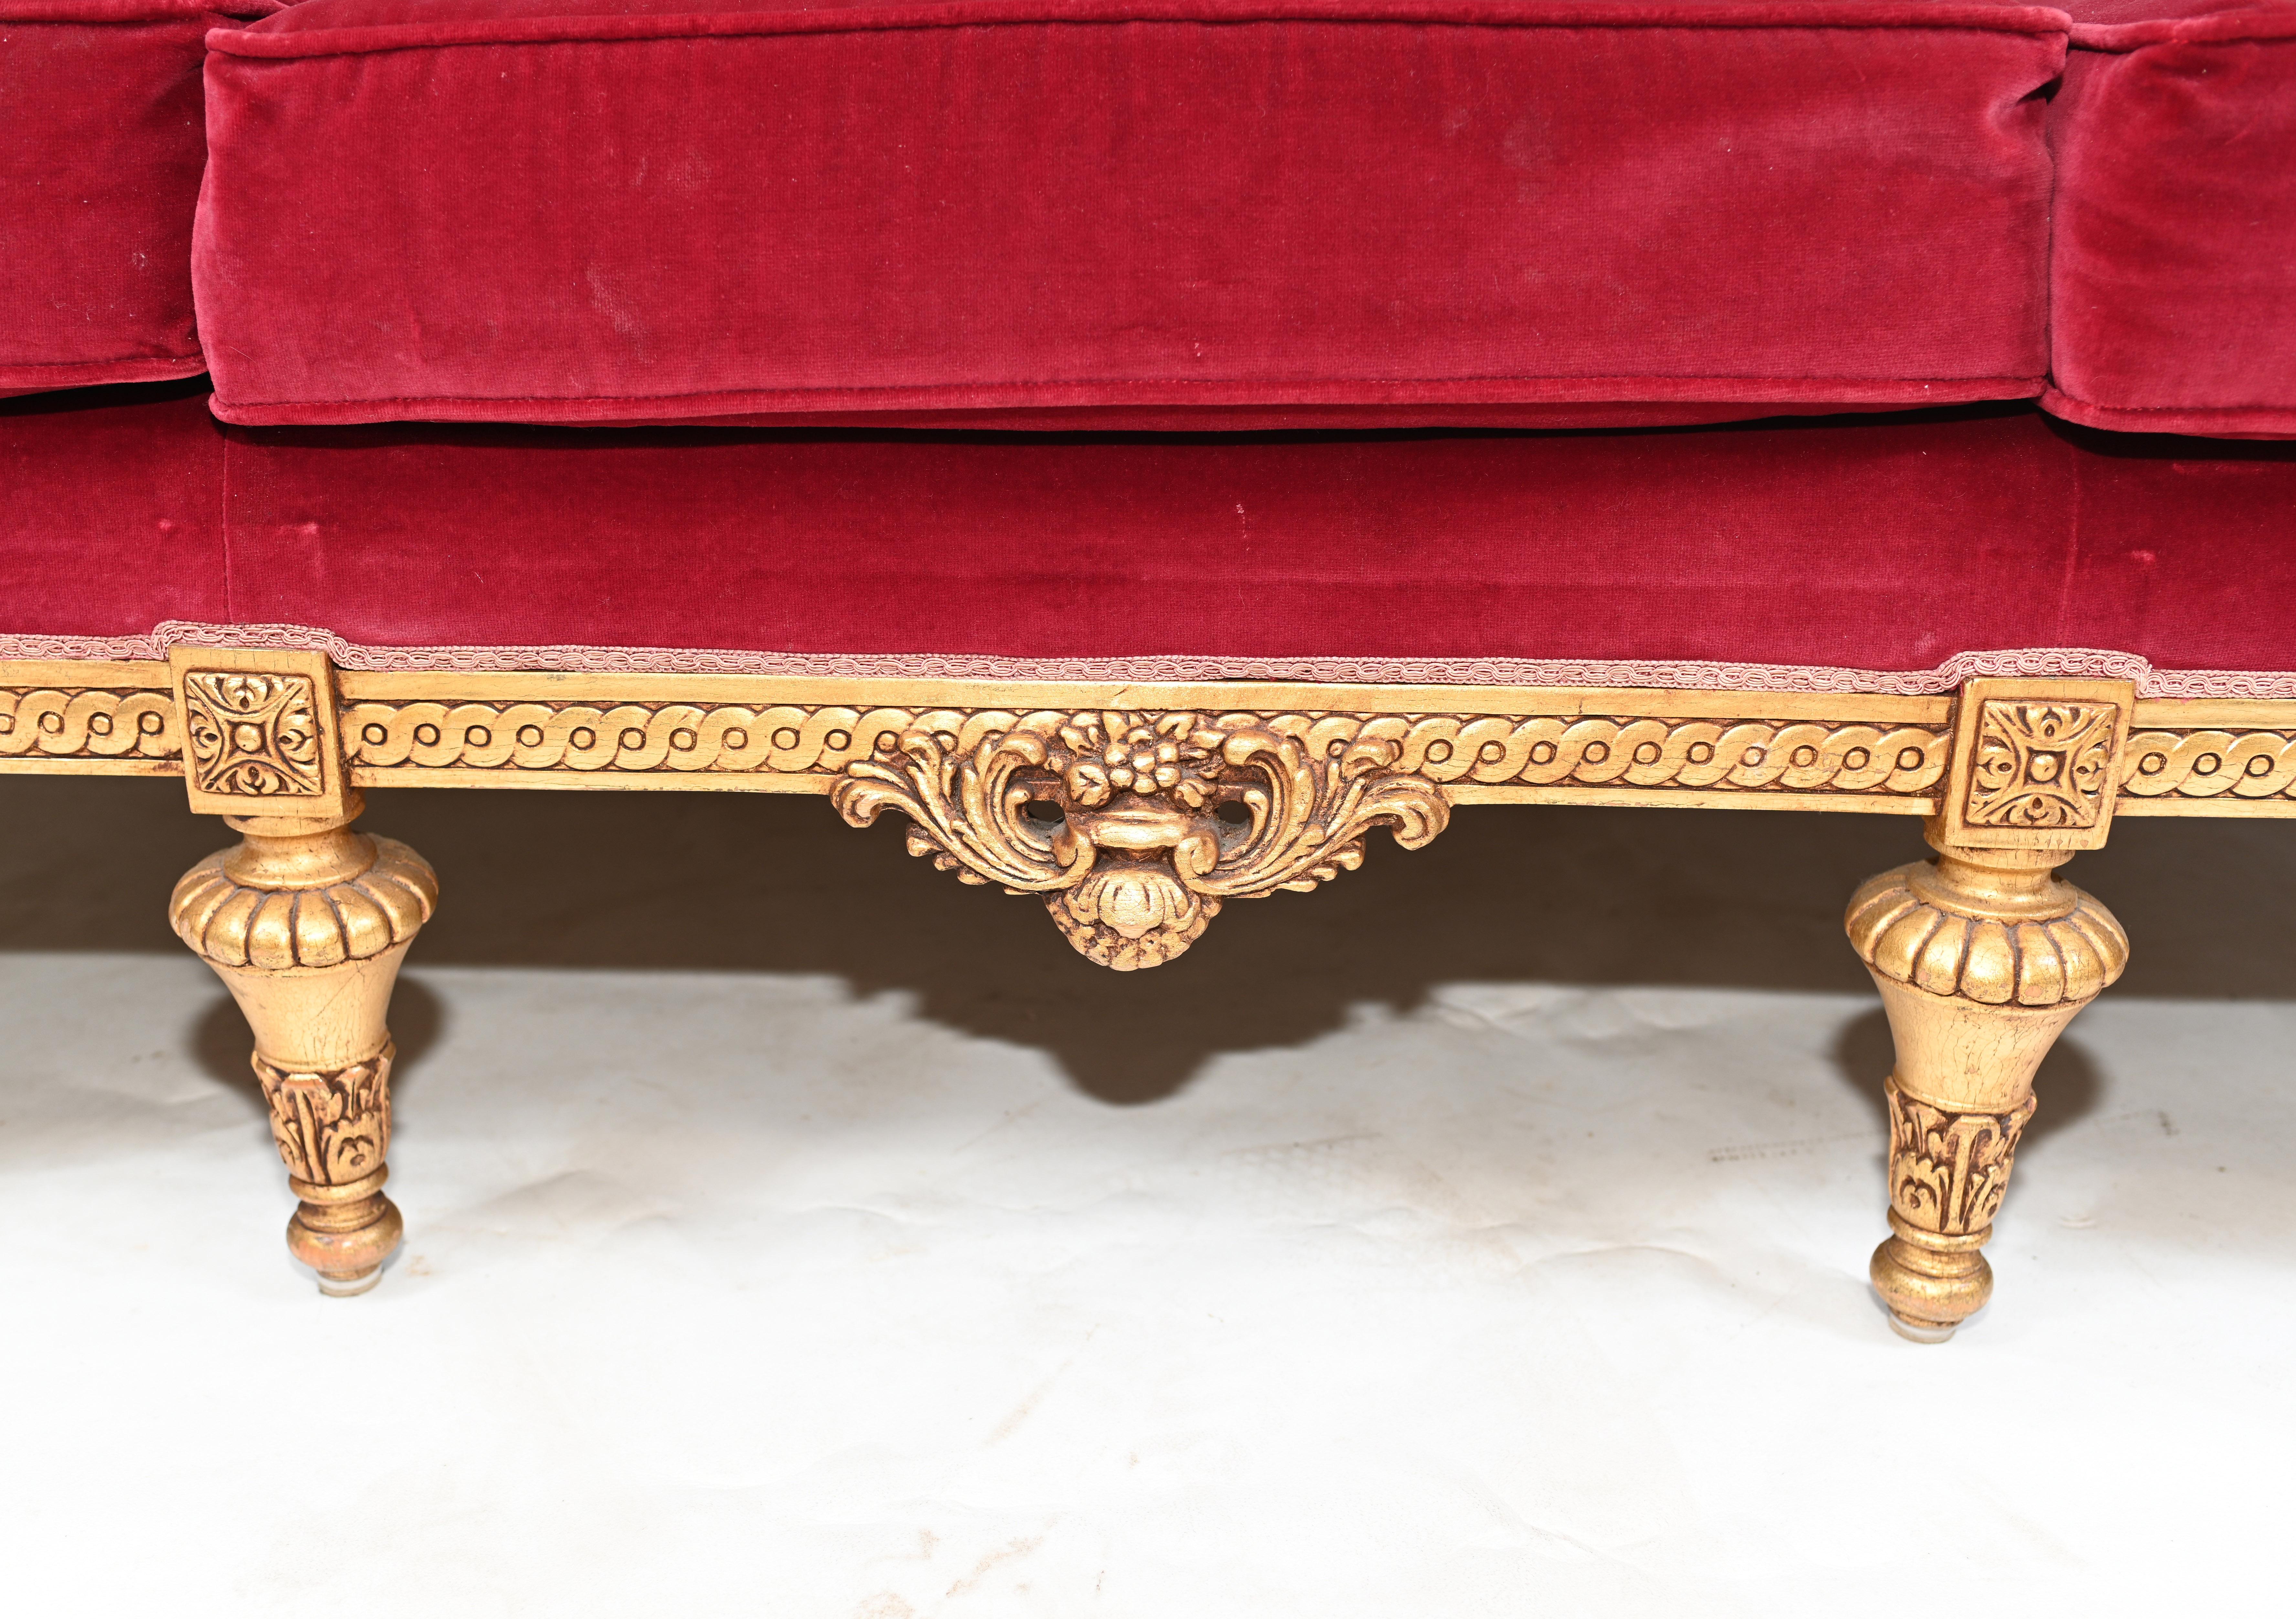  French Empire Sofa Giltwood Couch Seat  For Sale 3